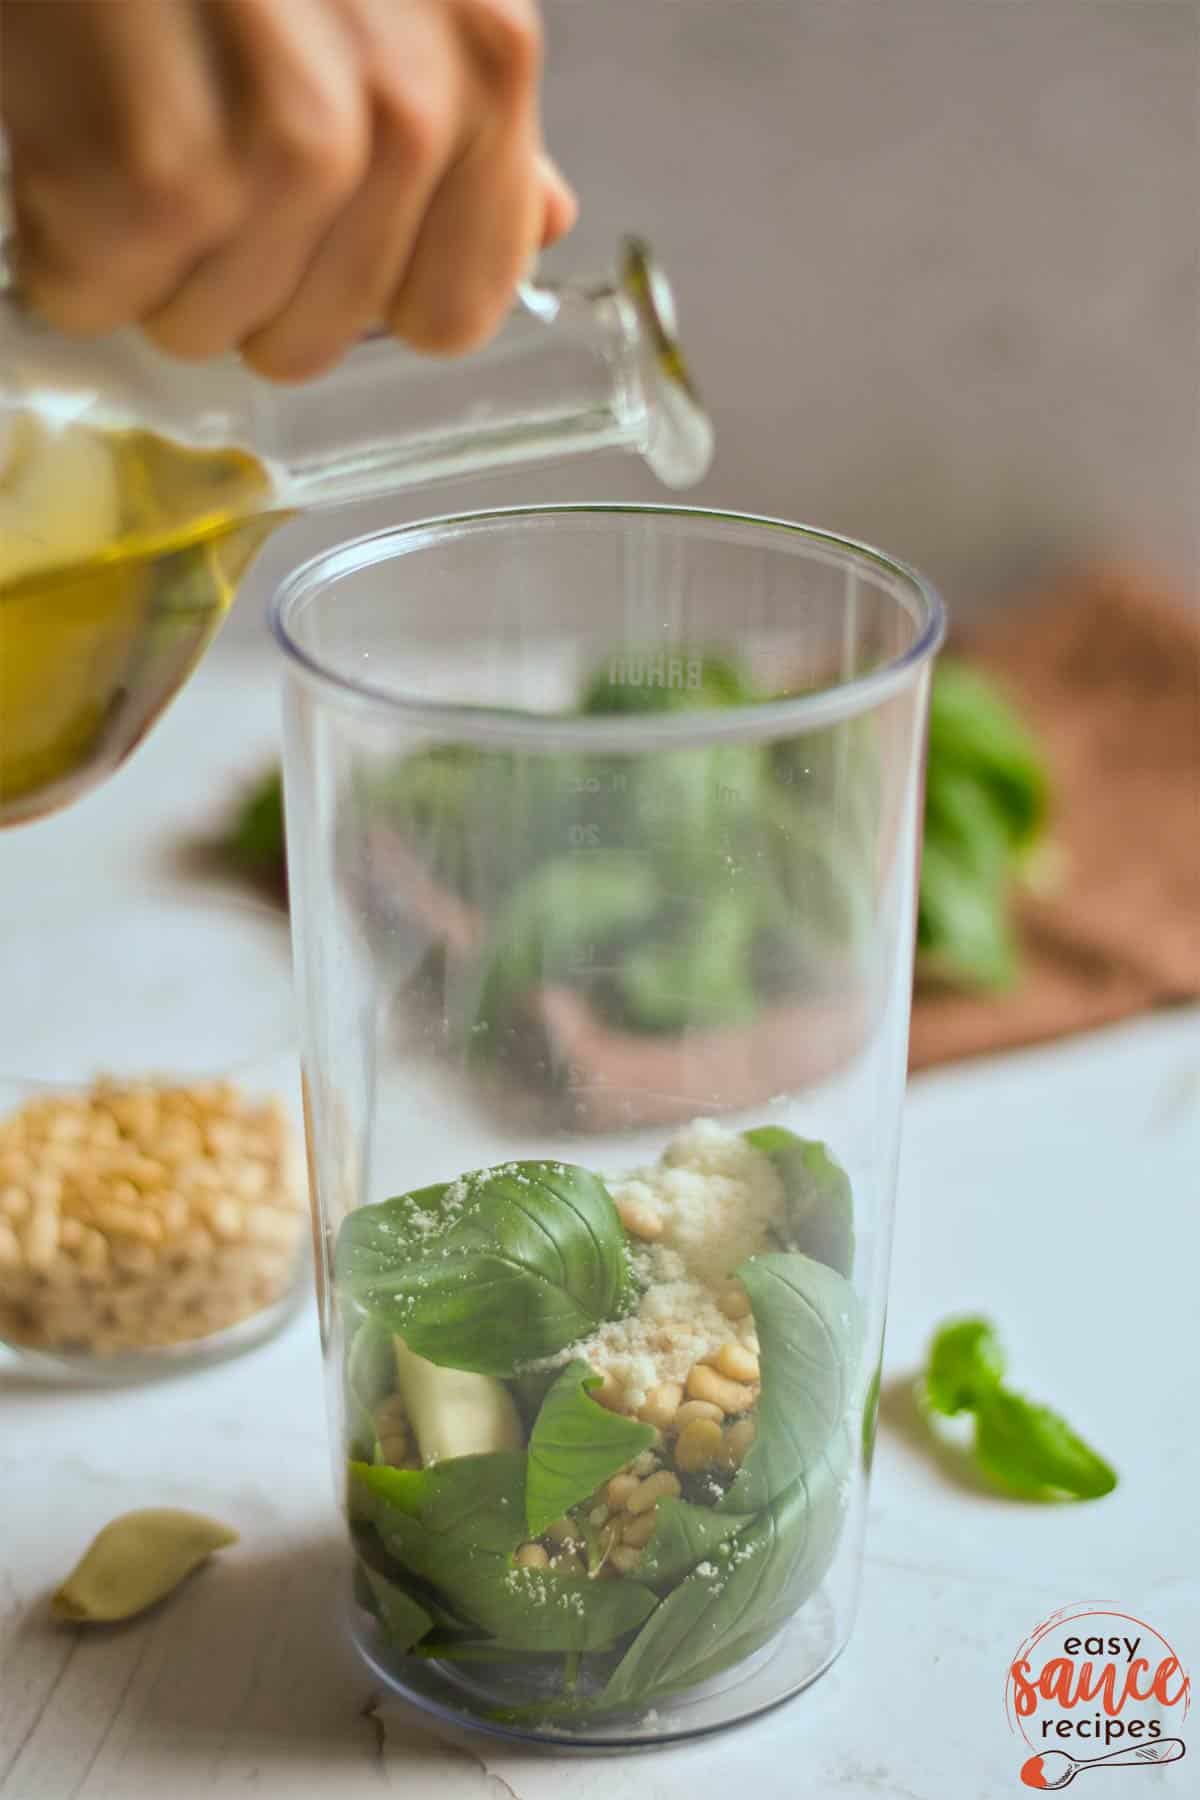 Pouring olive oil into a glass containing pesto ingredients